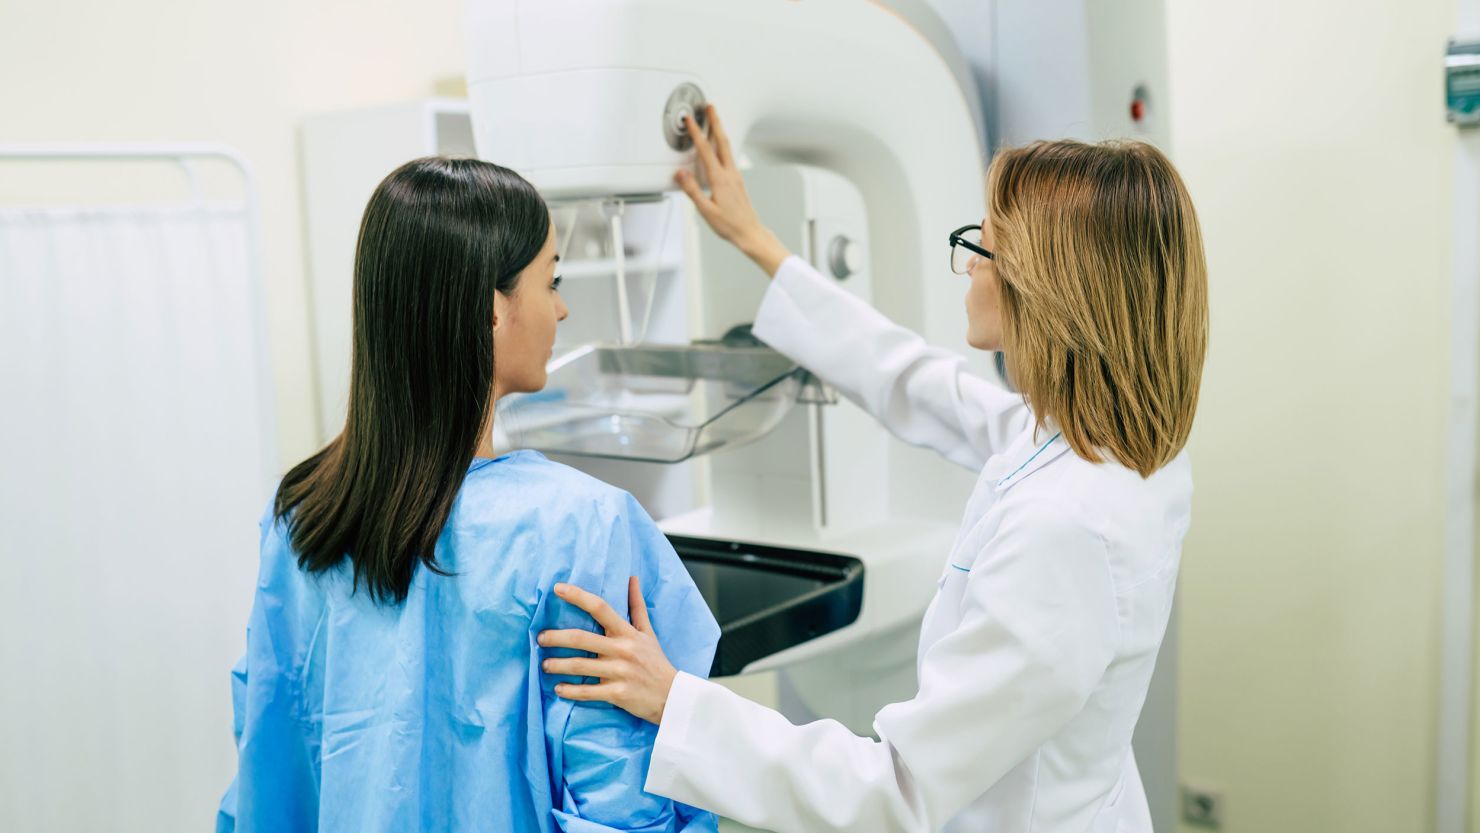 A mammogram is an X-ray picture of the breast that can help detect early signs of breast cancer.